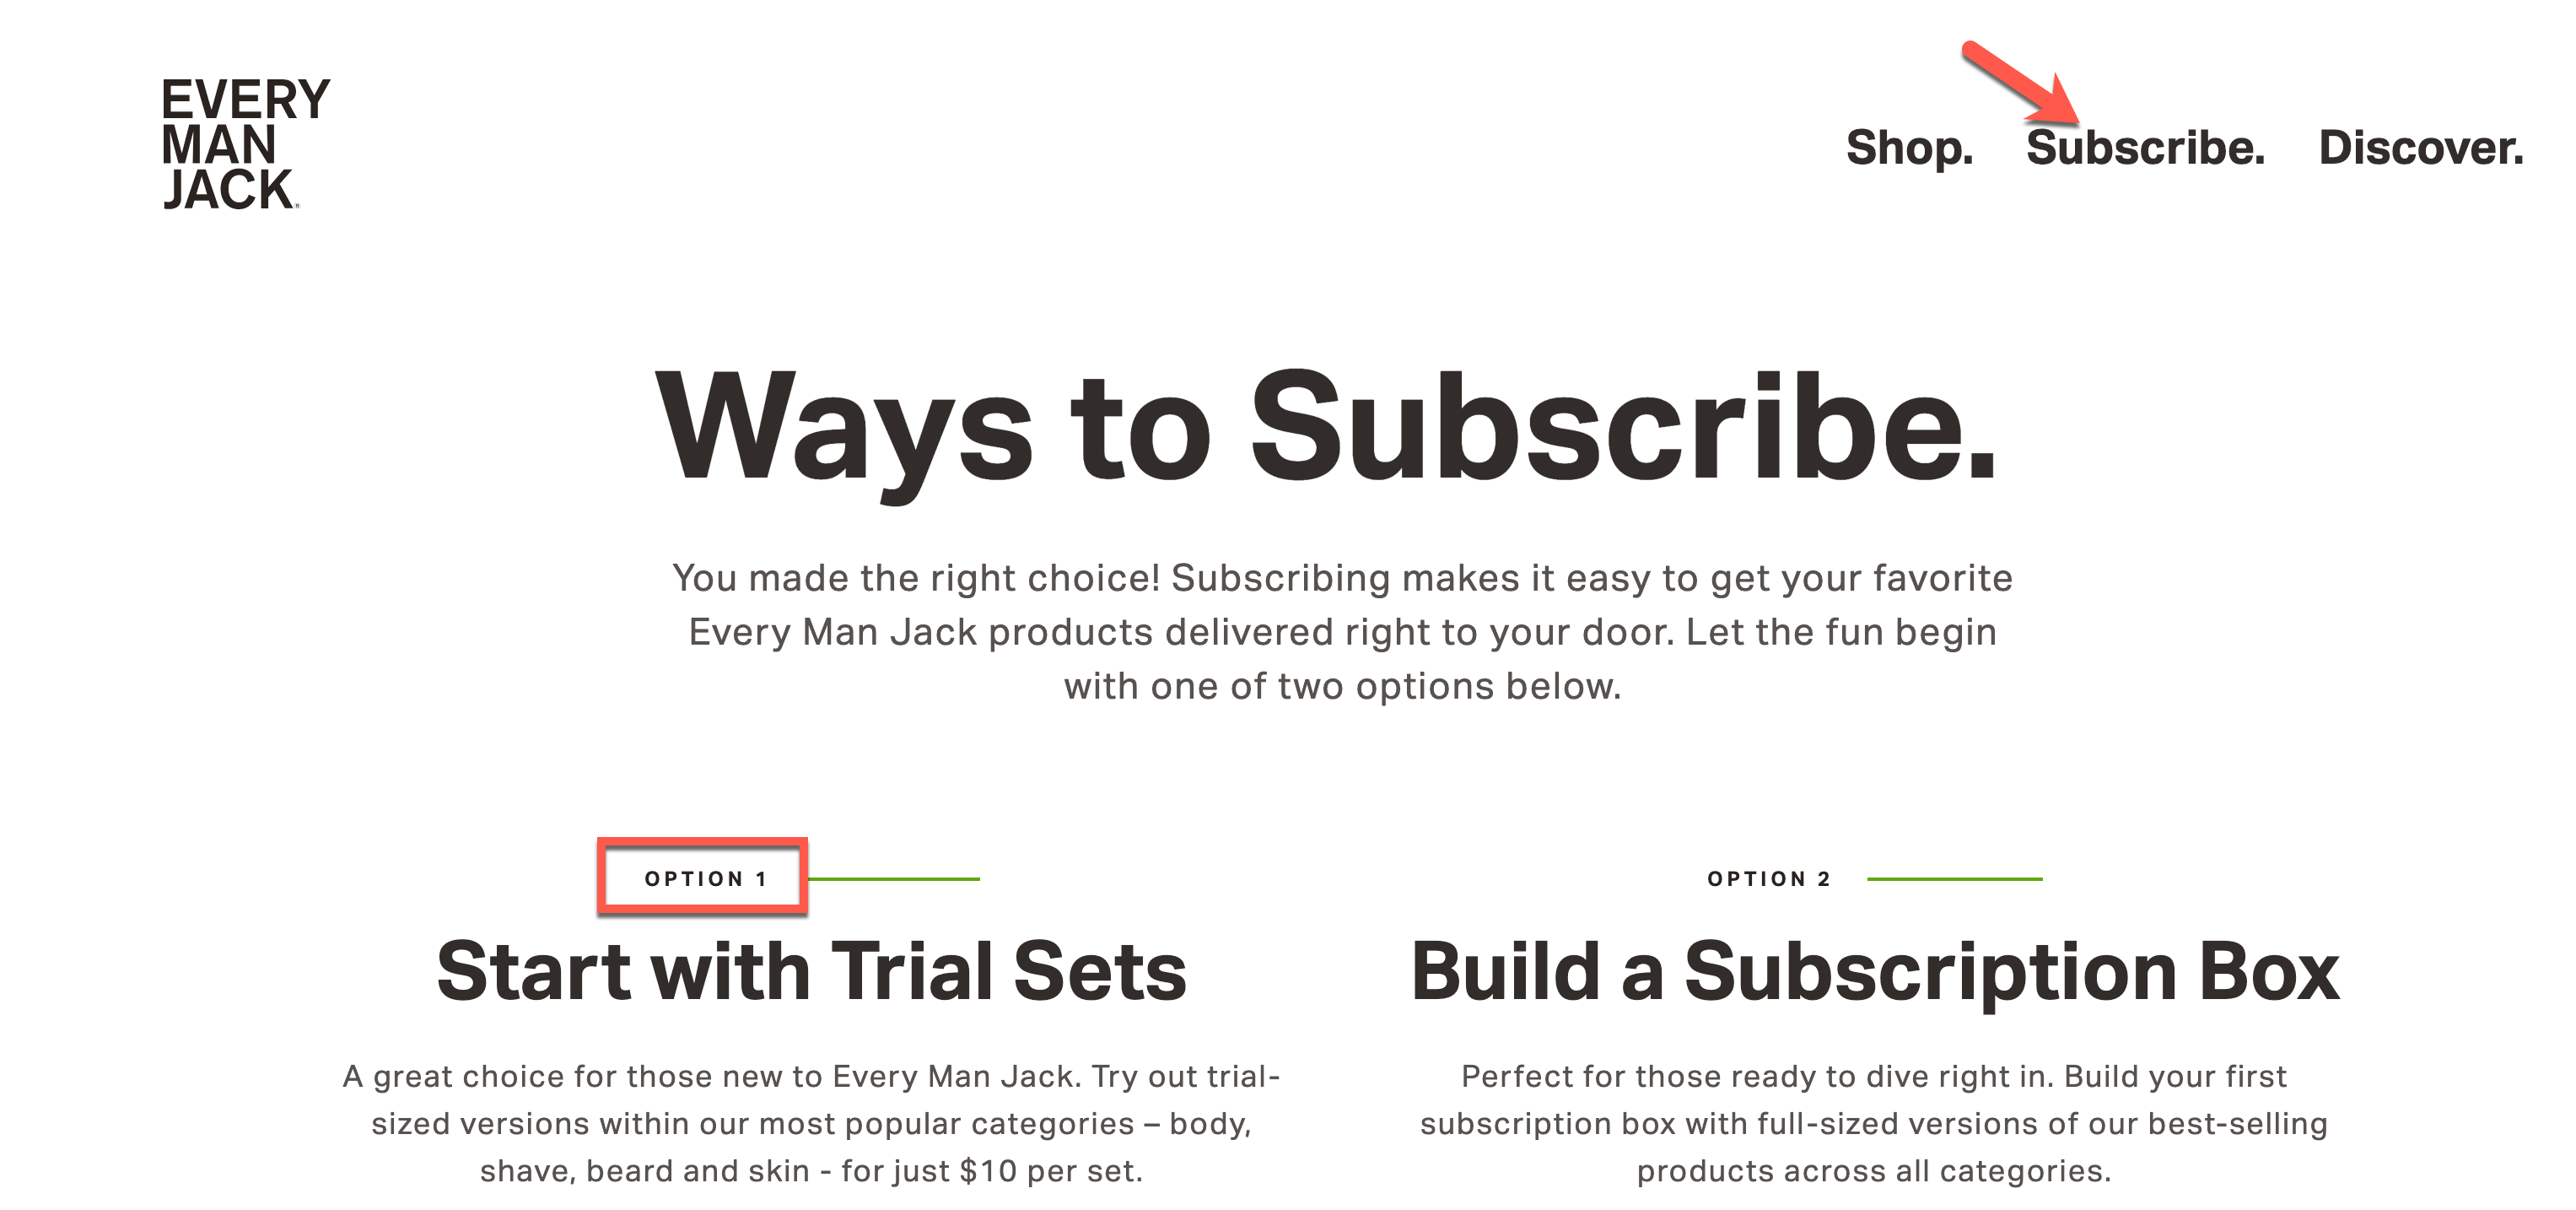 Subscription Tips: Every Man Jack "Subscribe" webpage with arrow pointing to Subscribe navigation link and a option 1 "Start with Trial Sets" highlights in a red square.